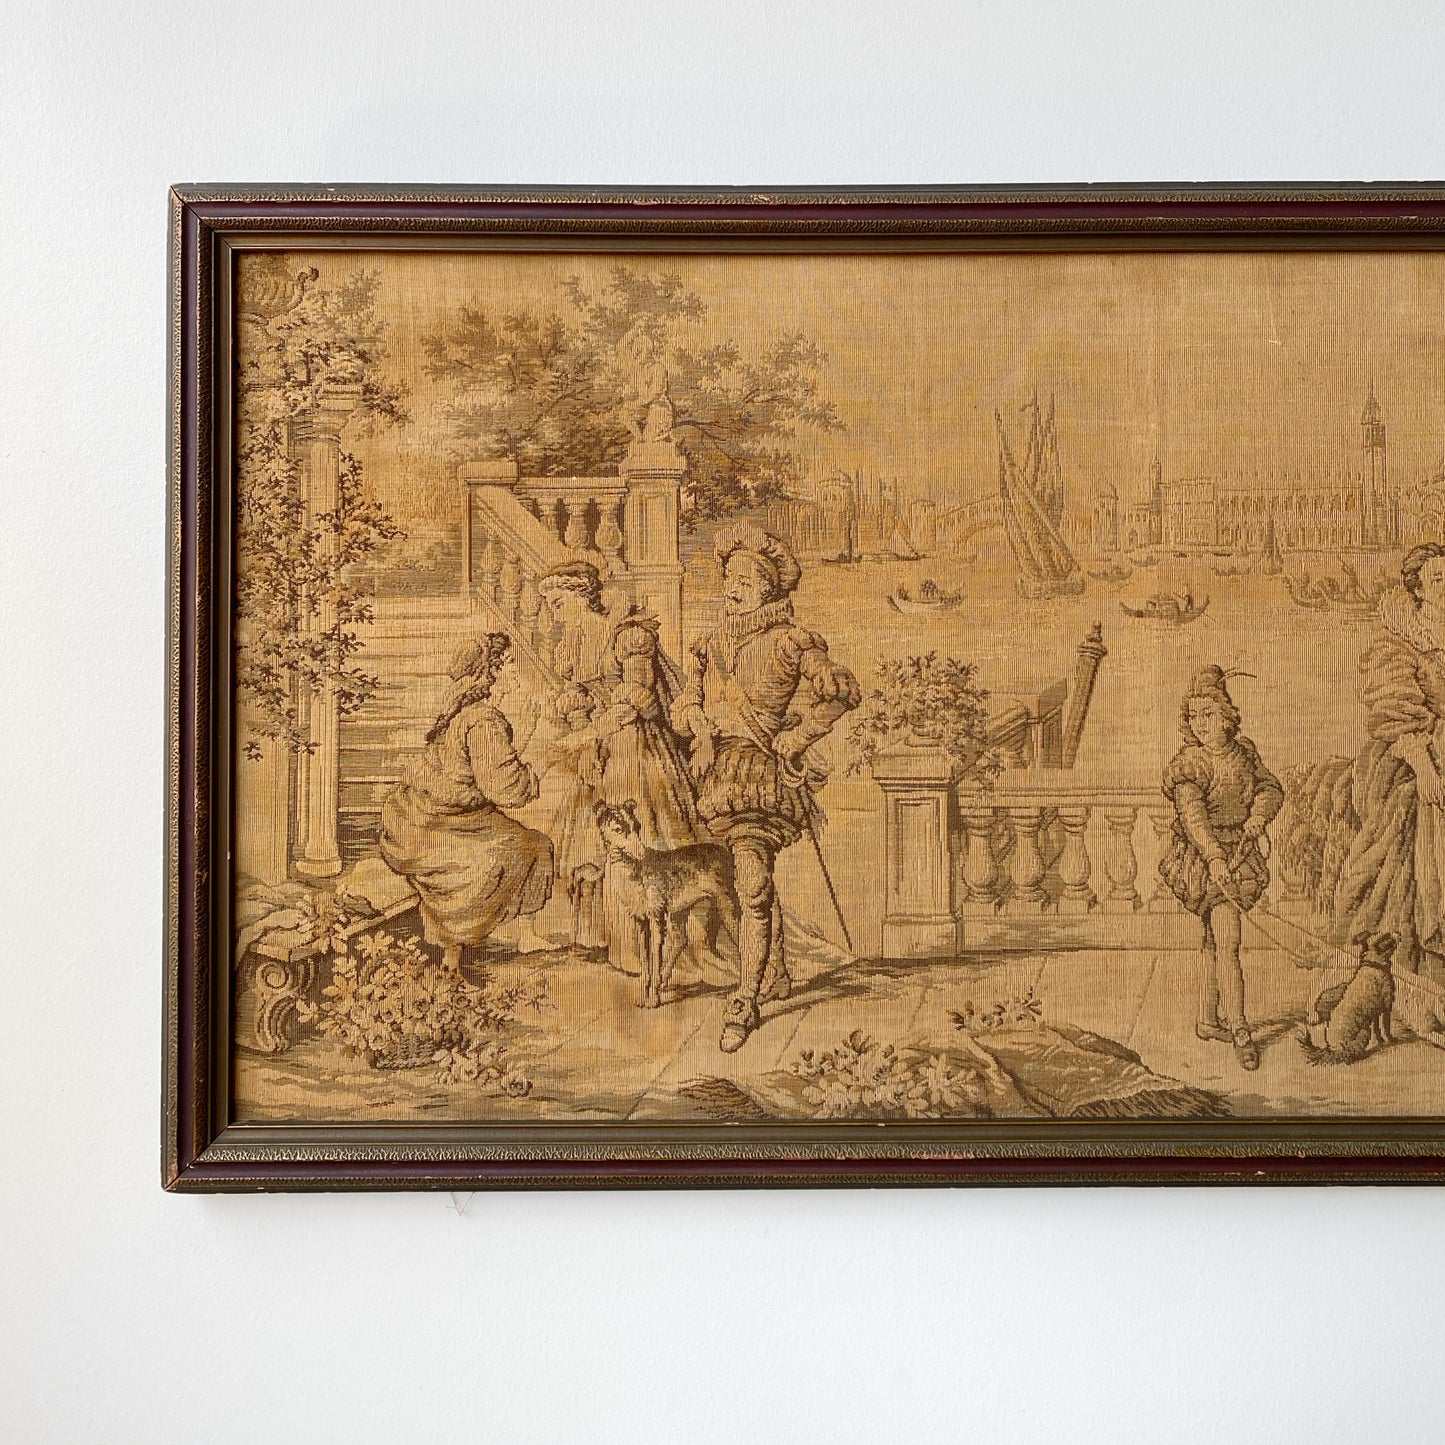 Framed Antique French Tapestry (21.5" x 10")